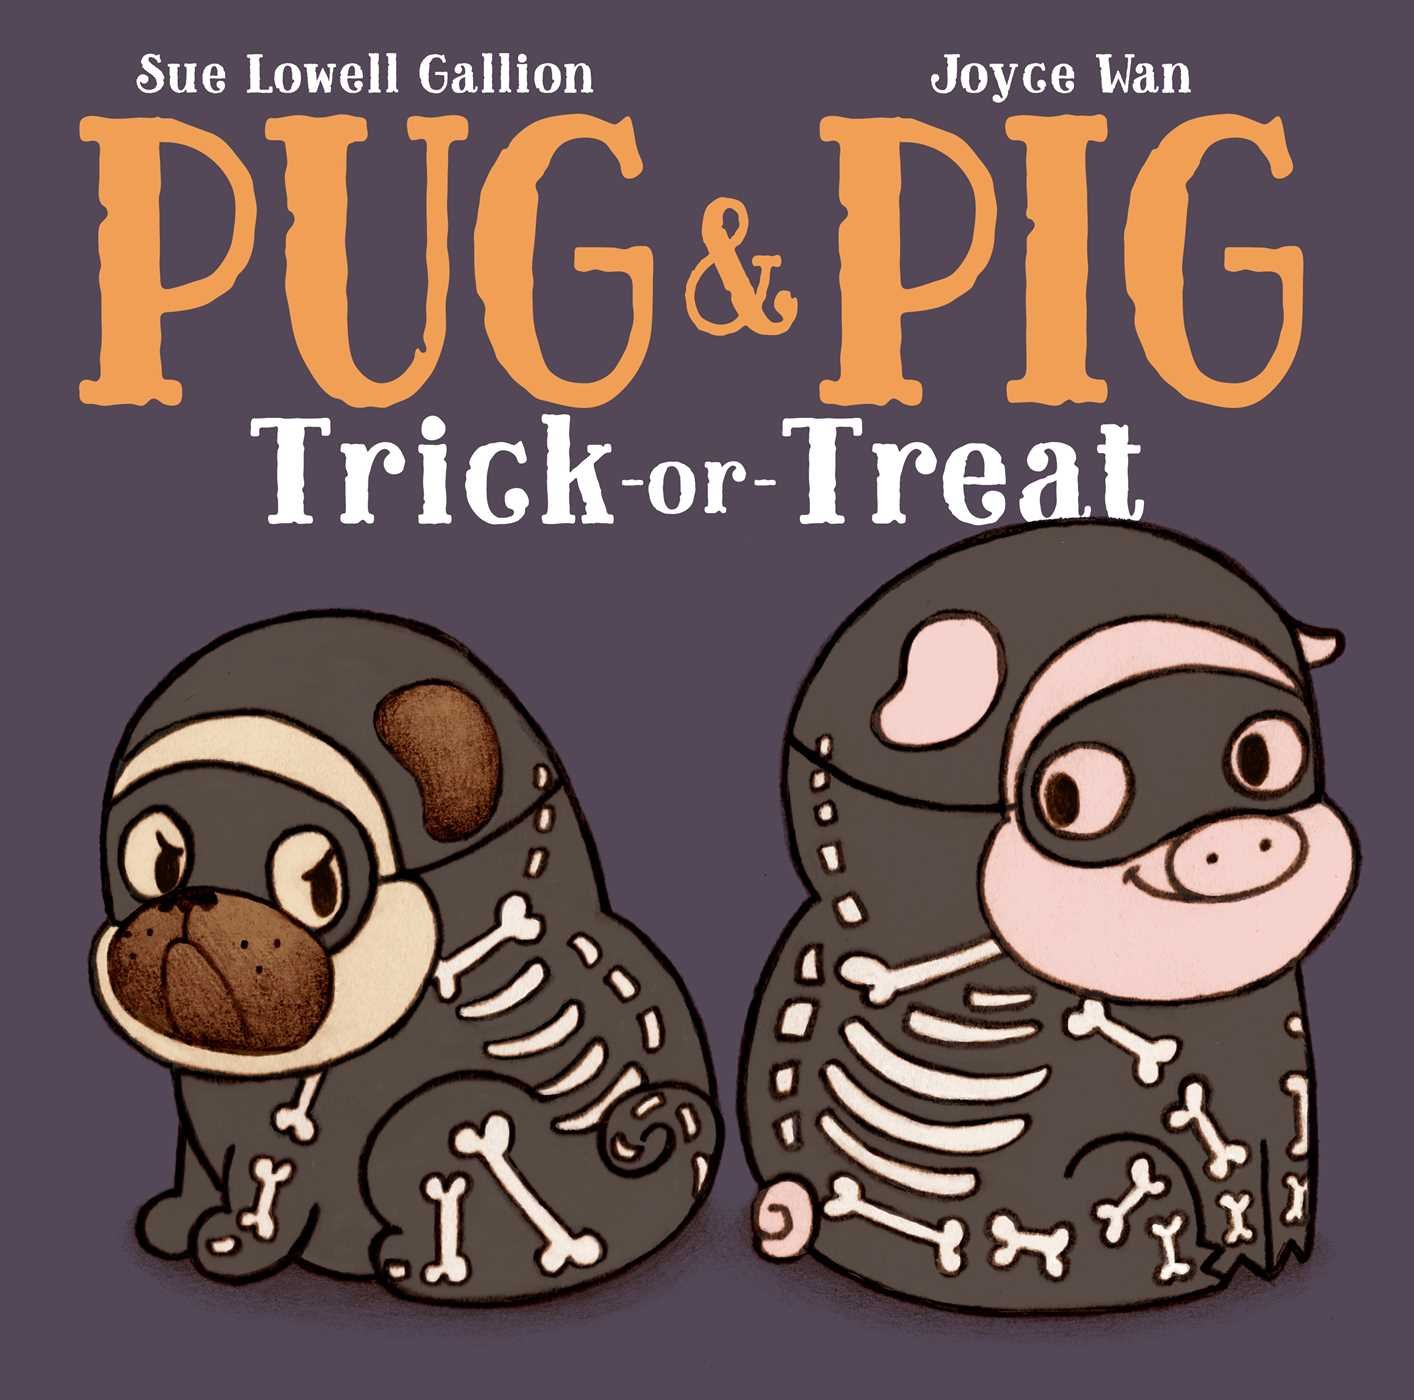 "Pug & Pig Trick or Treat" by Sue Lowell Gallion